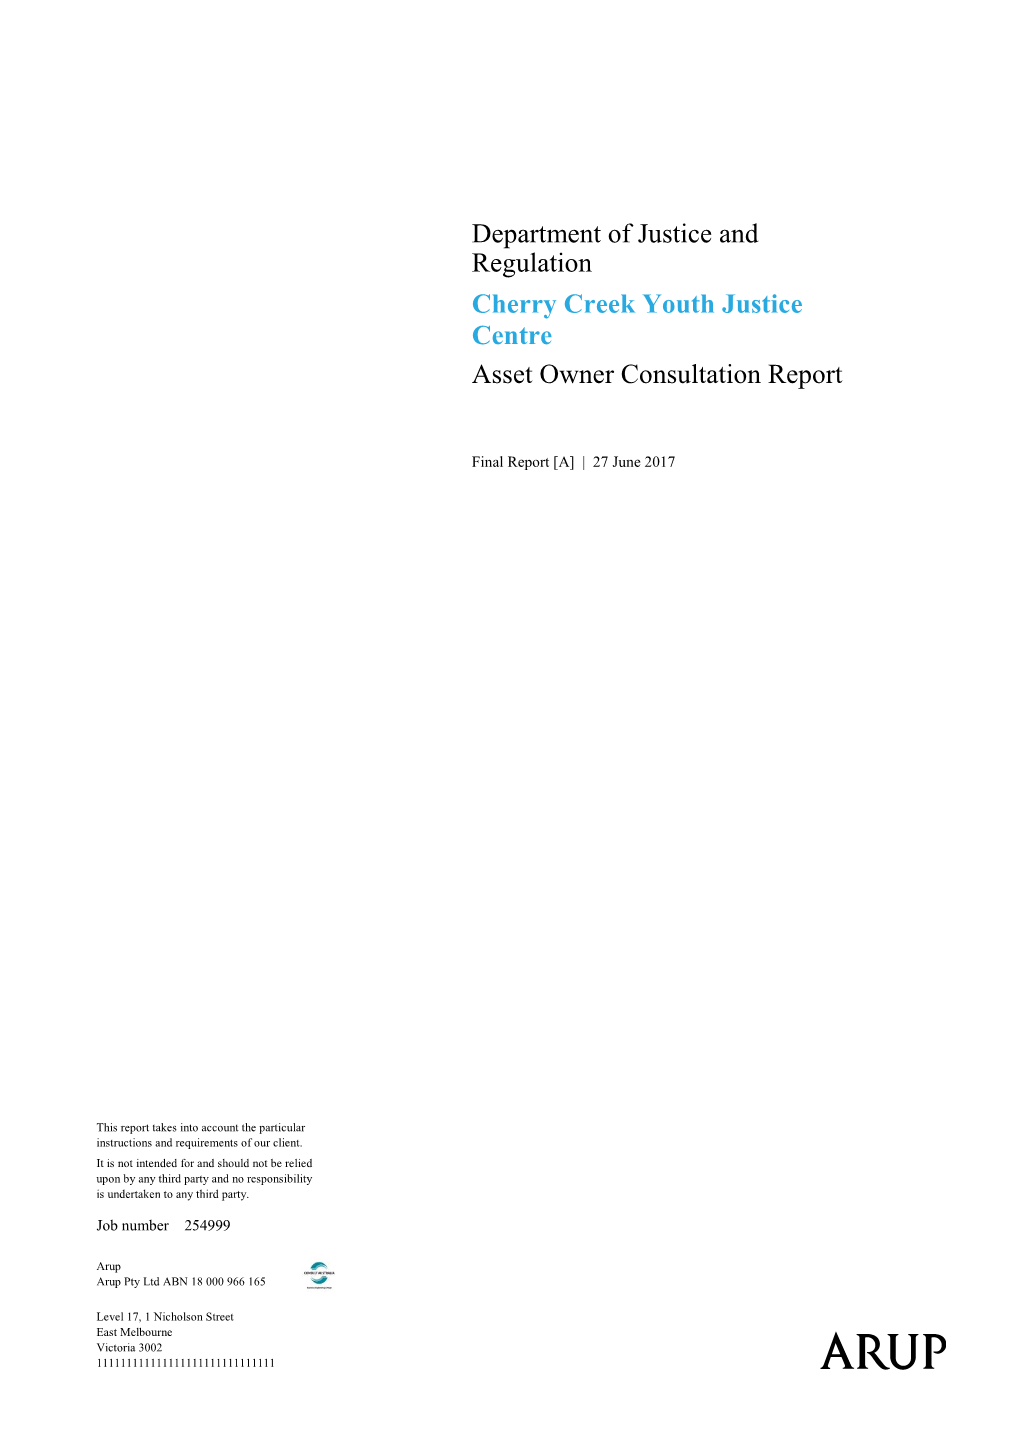 Department of Justice and Regulation Cherry Creek Youth Justice Centre Asset Owner Consultation Report